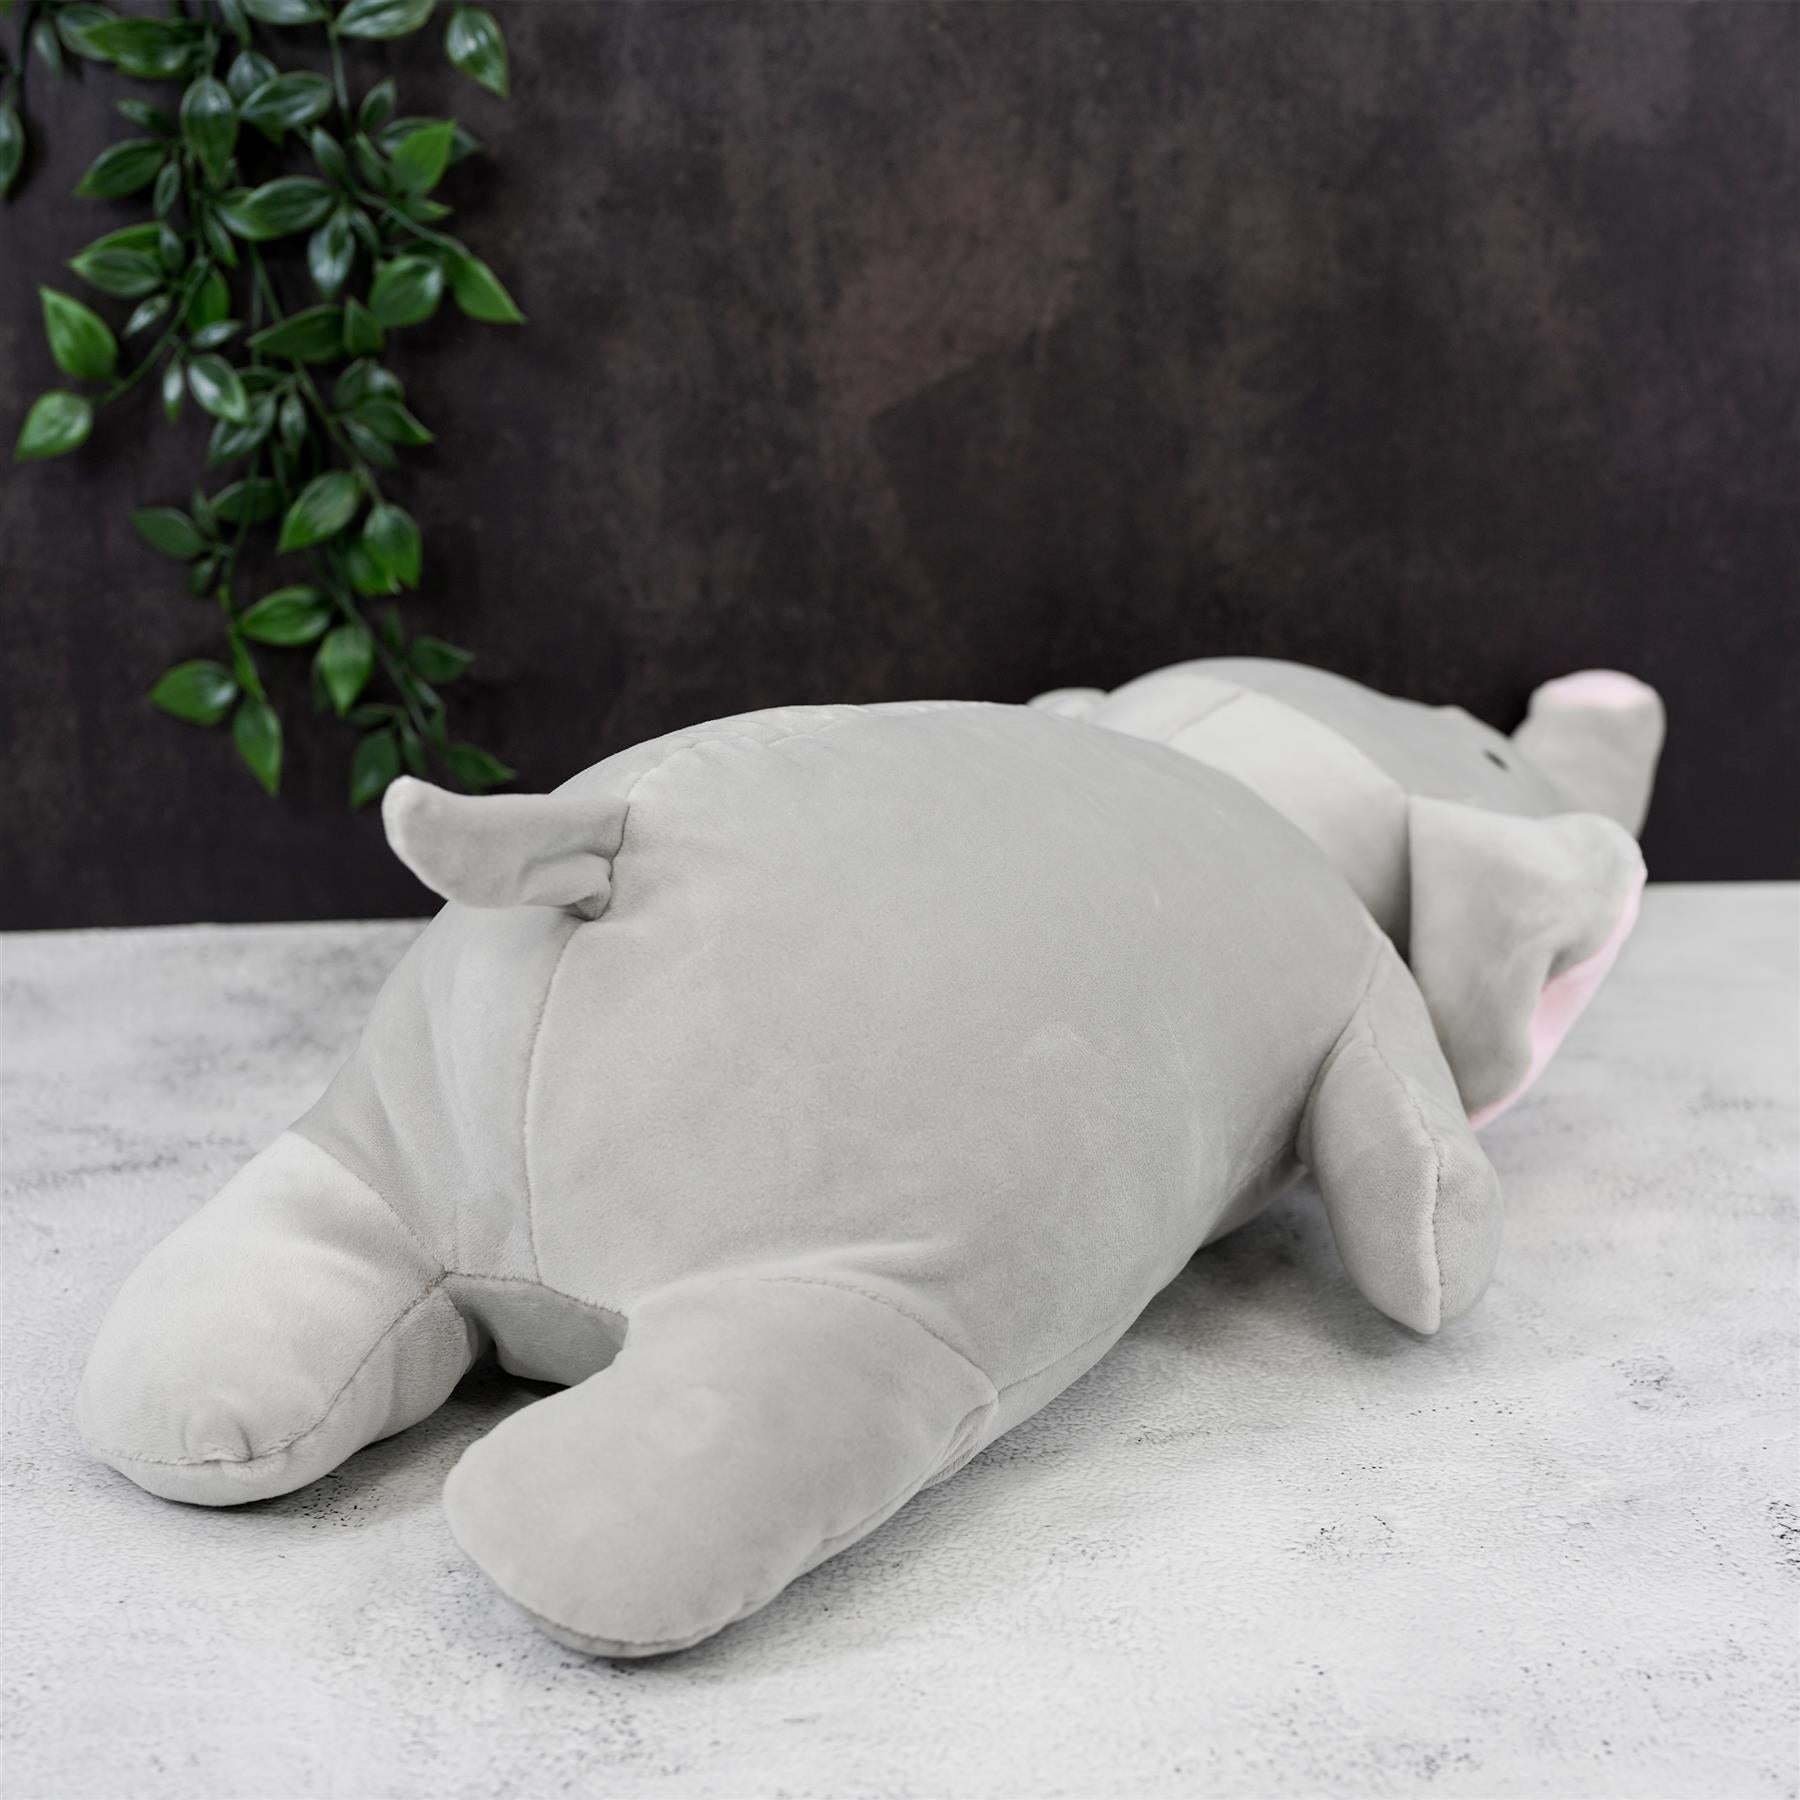 20” Super-Soft Elephant Plush Pillow Toy by The Magic Toy Shop - The Magic Toy Shop